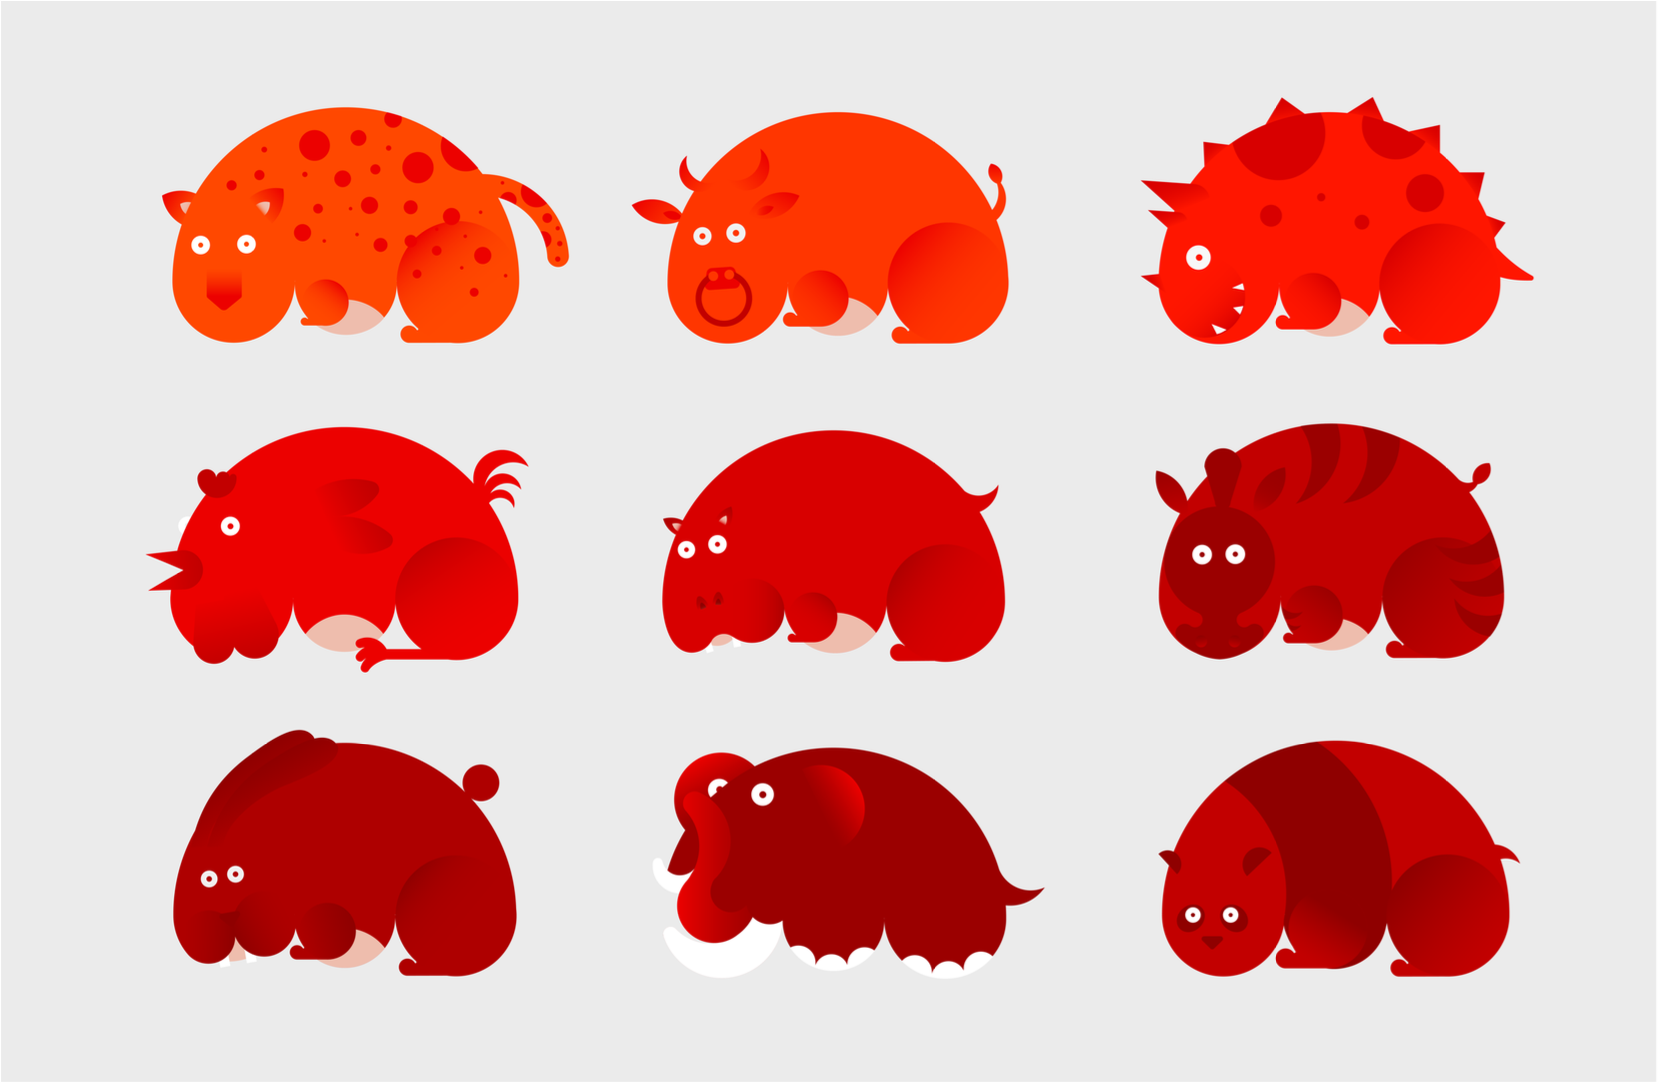 A set of nine red creatures drawn in the same style that represent: a leopard, a tiger, a bull, a hypo, a chicken, a dinosaur, bunny, an elephant or a panda.